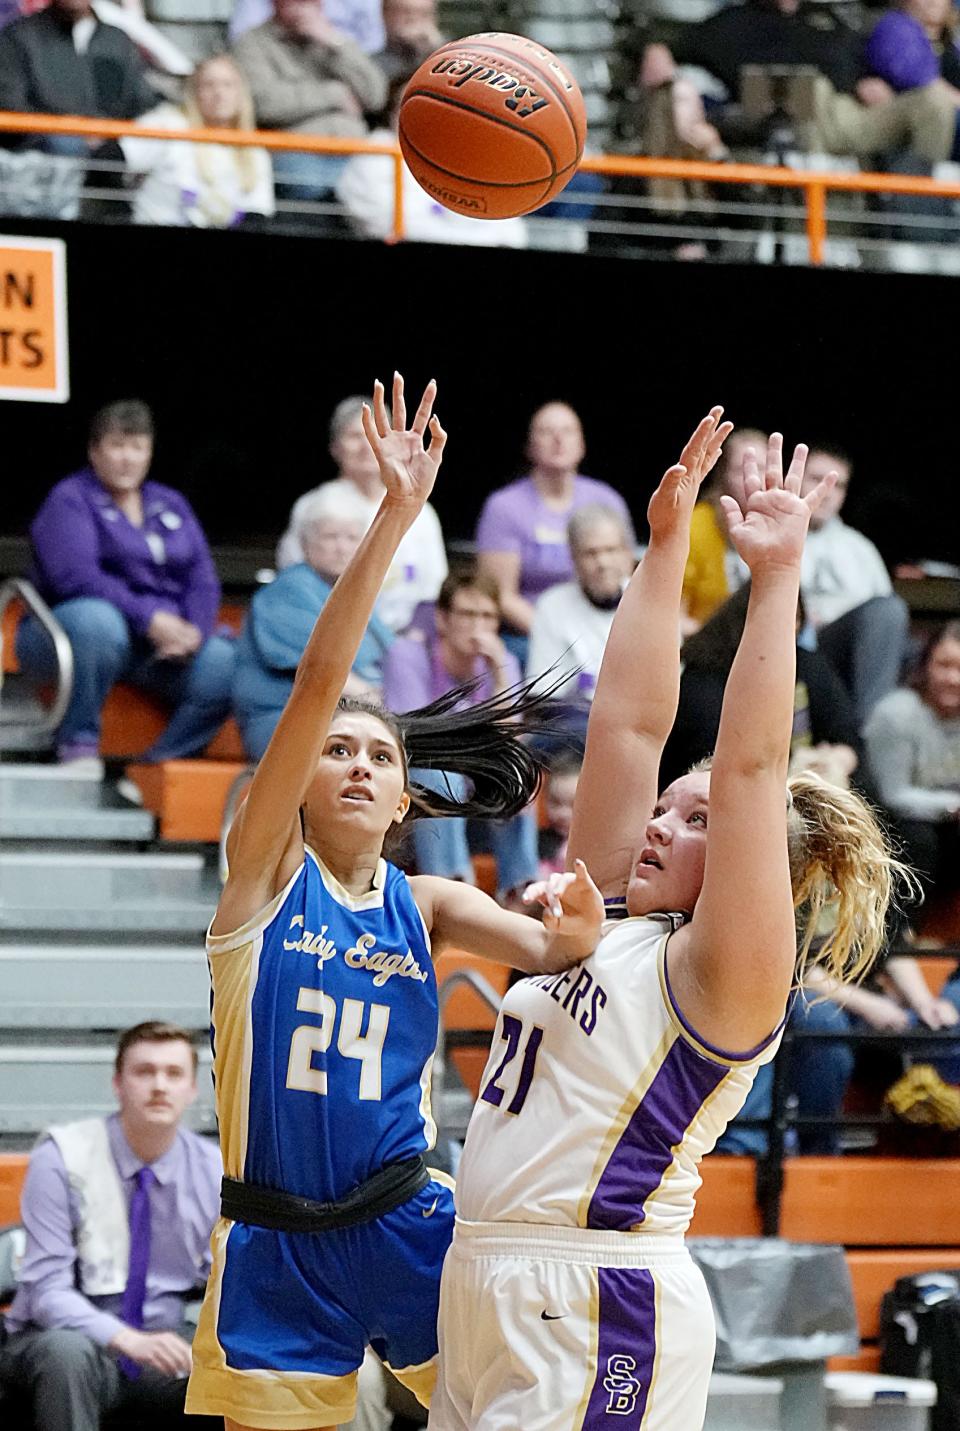 Wall's Lydia Hill (24) shoots over Sully Buttes' Loucasey Tines during their first-round game in the state Class B high school girls basketball tournament on Thursday, March 9, 2023 in the Huron Arena. Wall won 58-50.